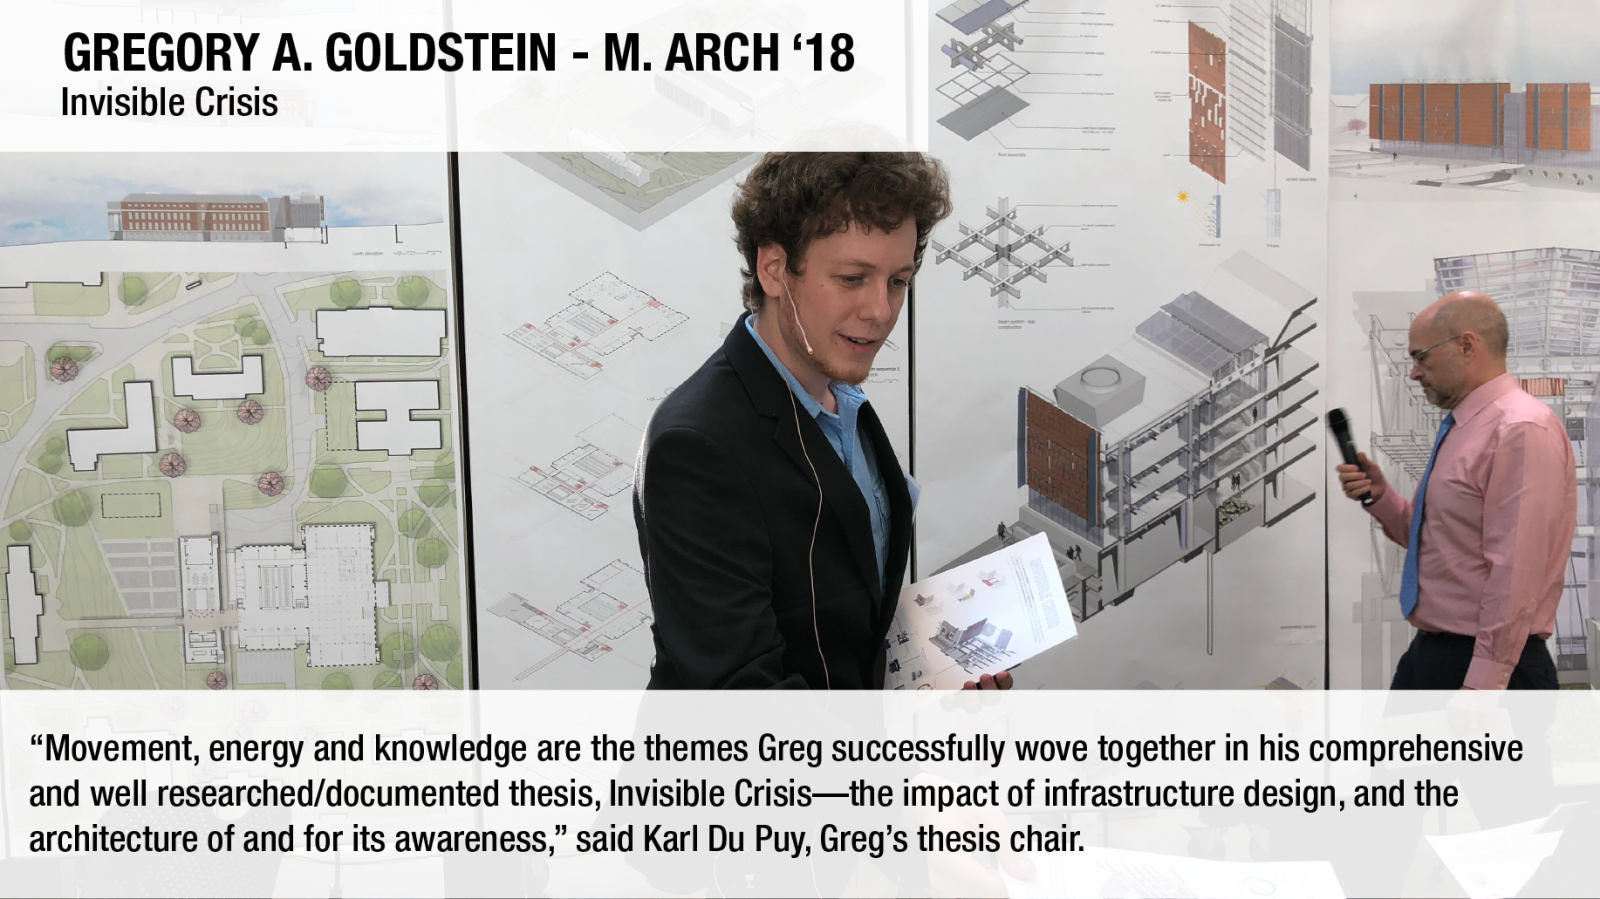 Thesis grand prize winner, Gregory Goldstein